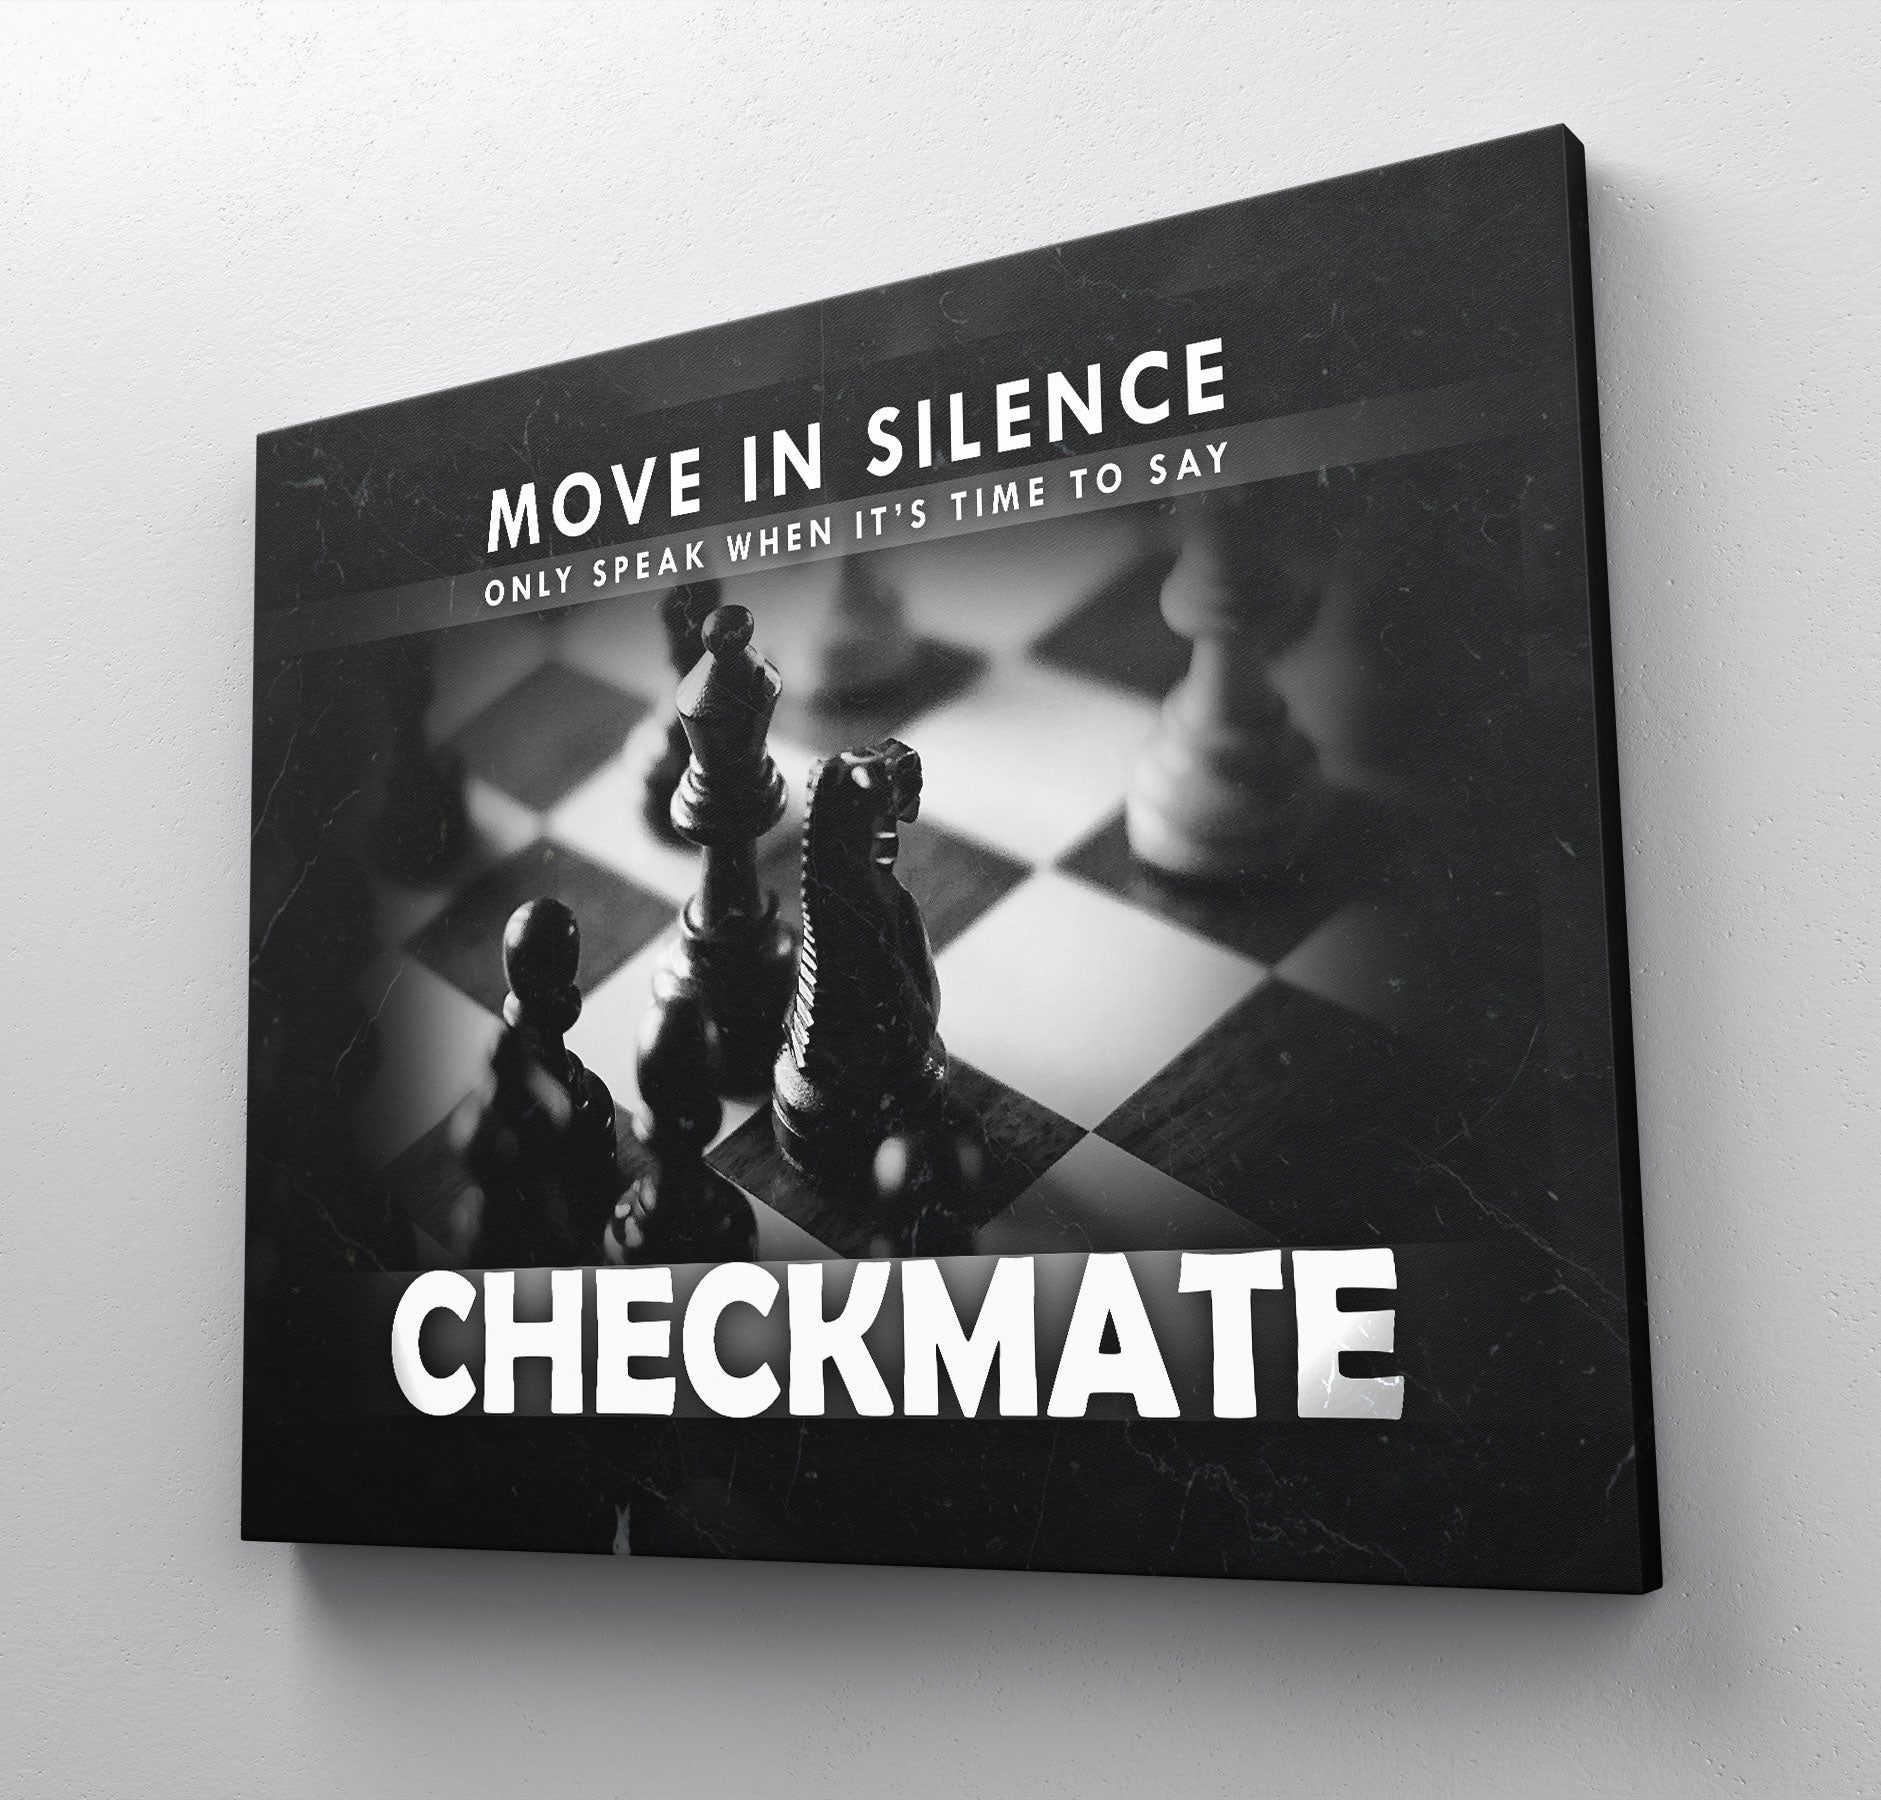 Definition & Meaning of Checkmate